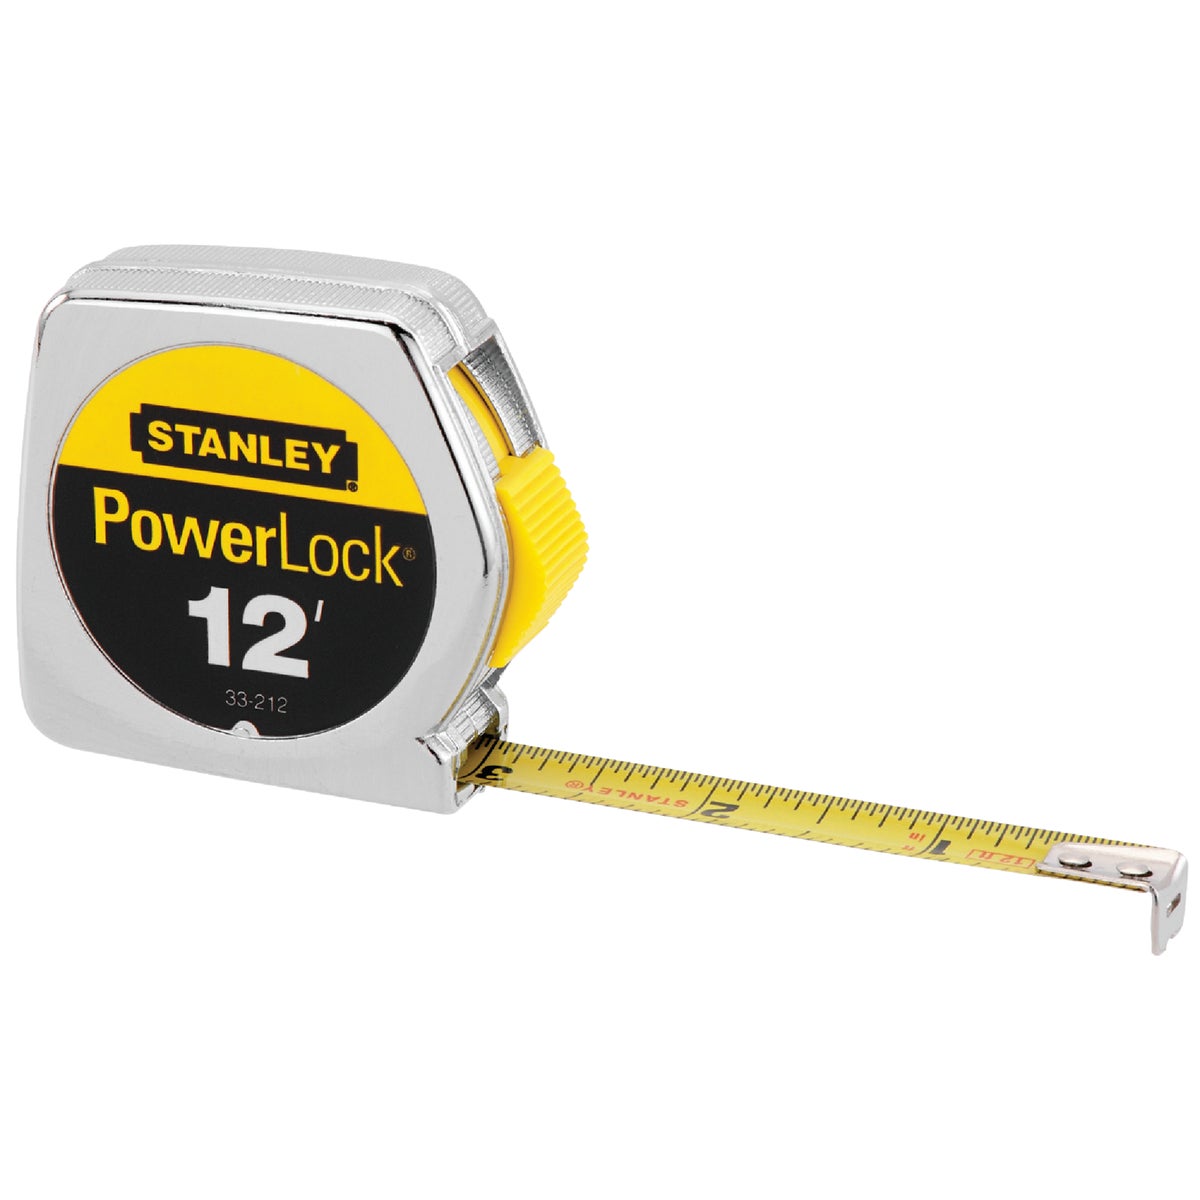 Item 322742, PowerLock tape measure with 7 Ft. blade standout.